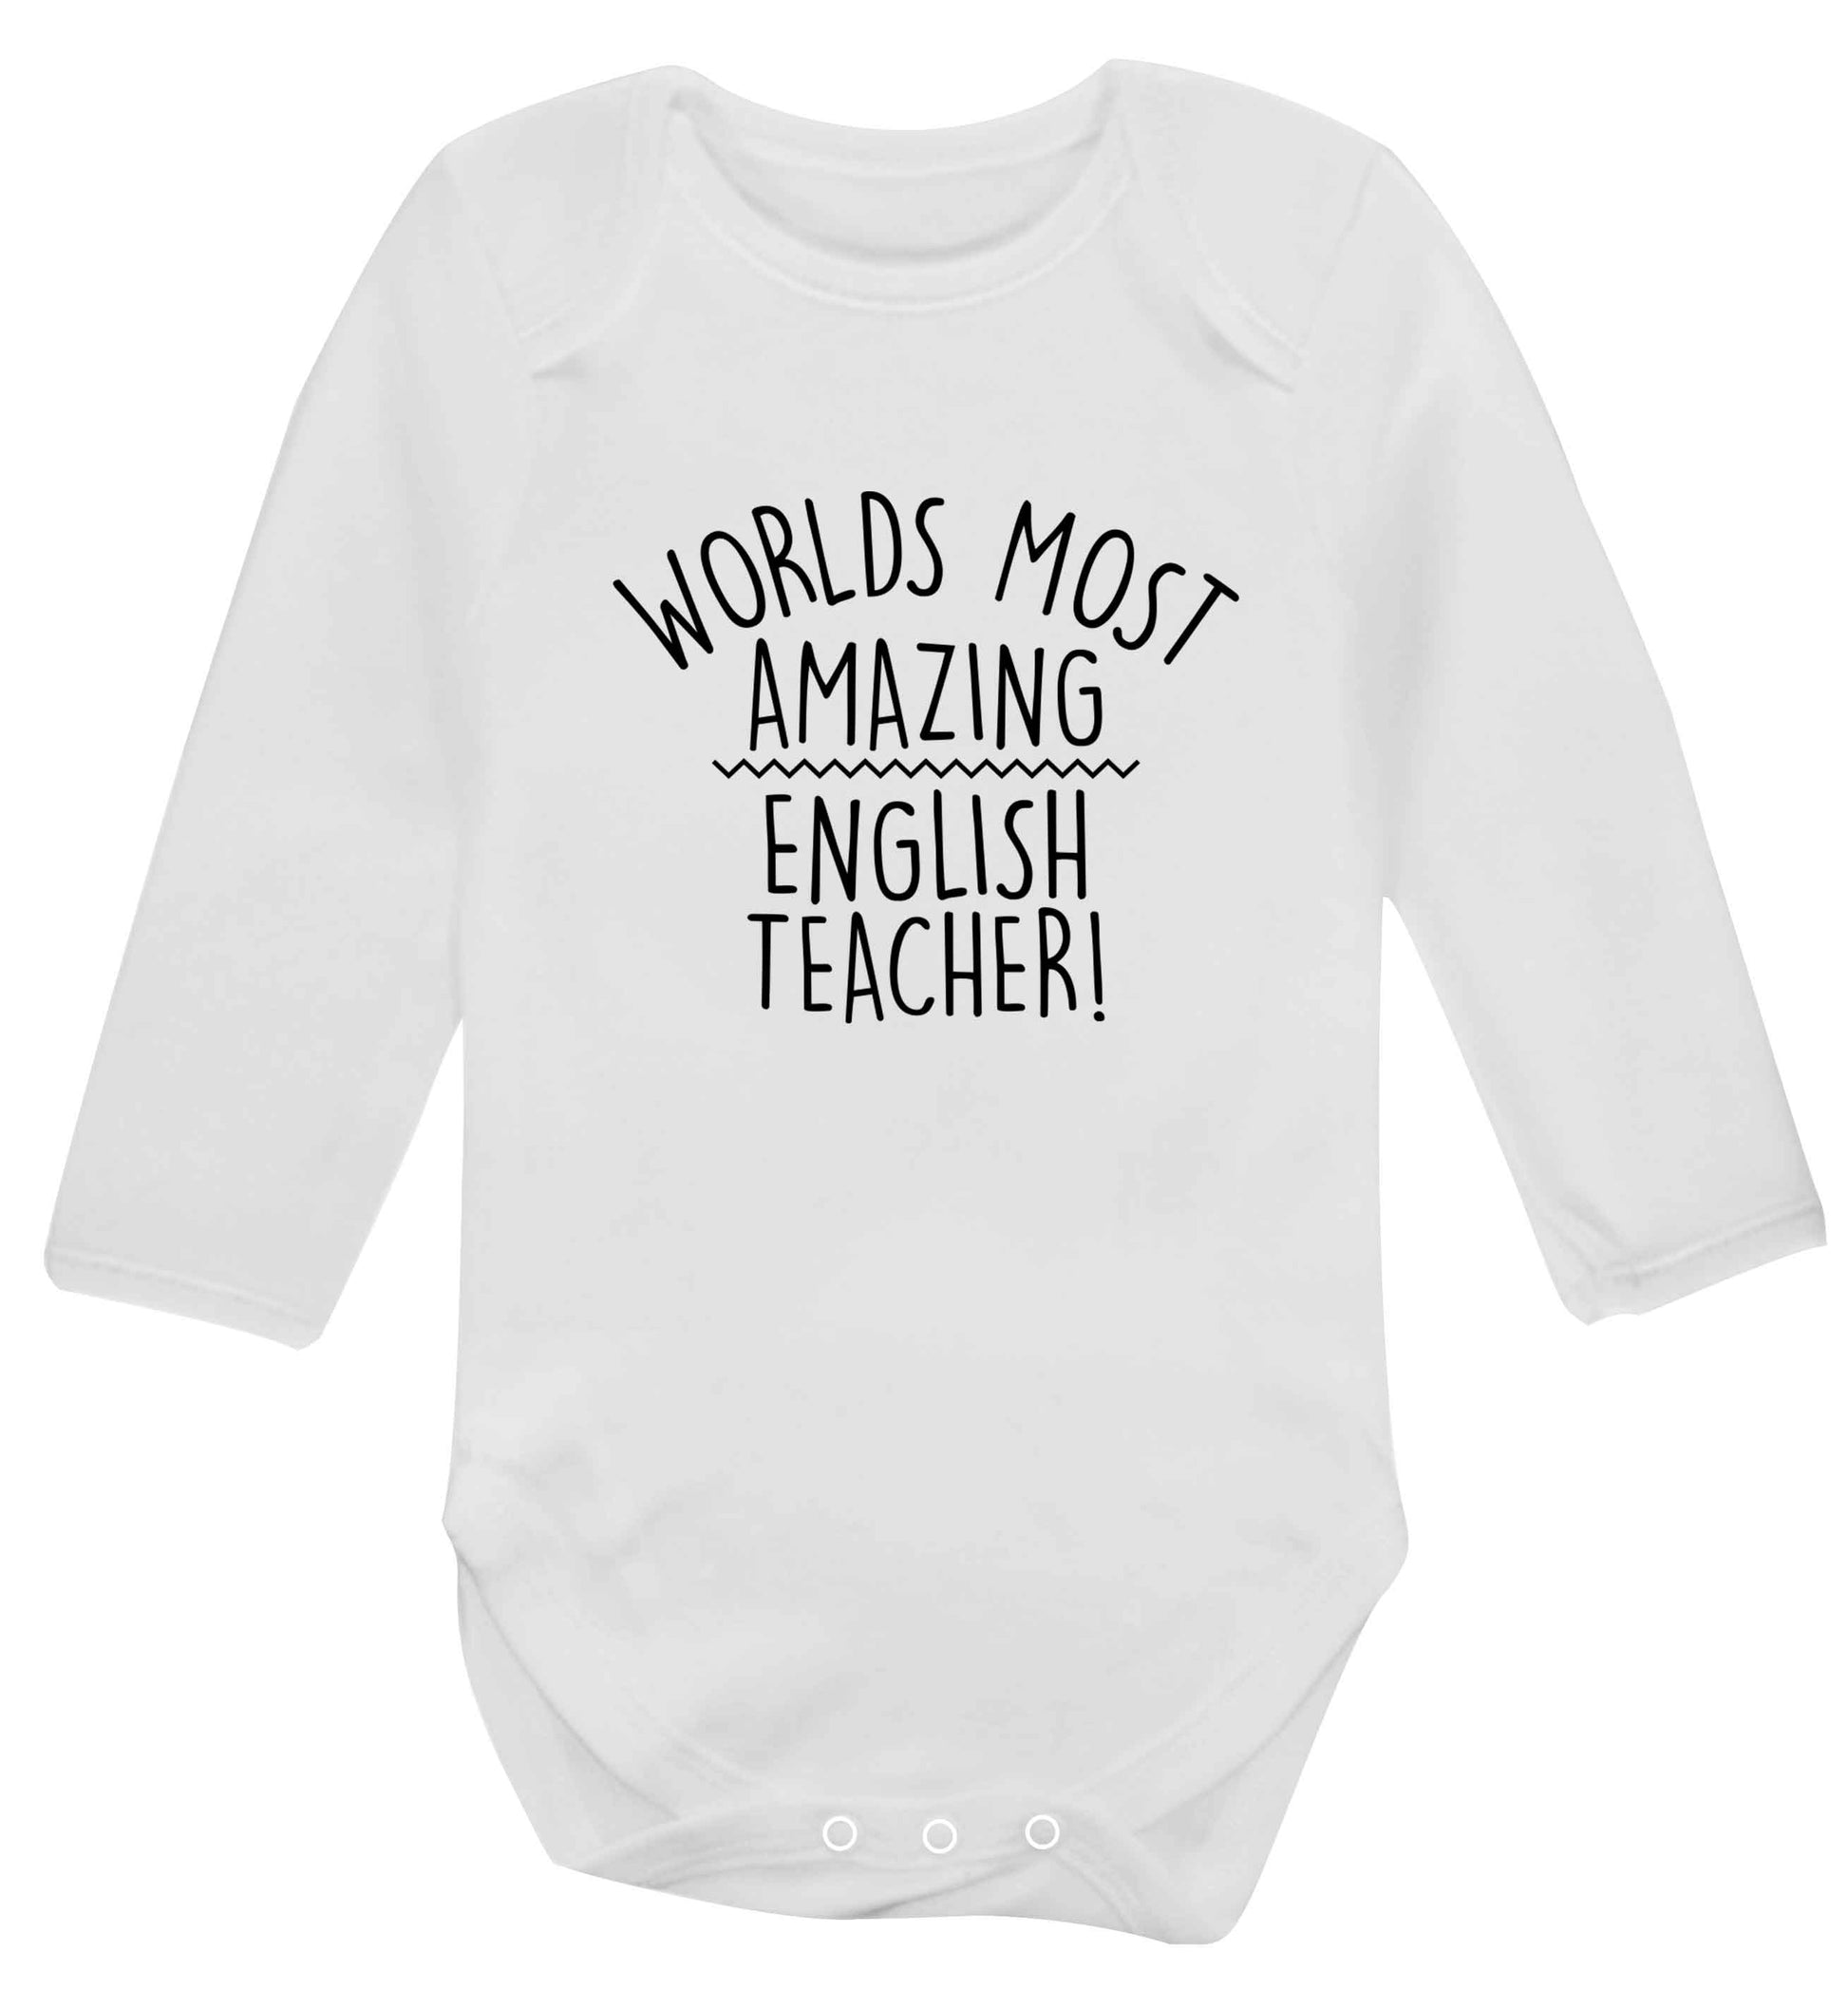 Worlds most amazing English teacher baby vest long sleeved white 6-12 months